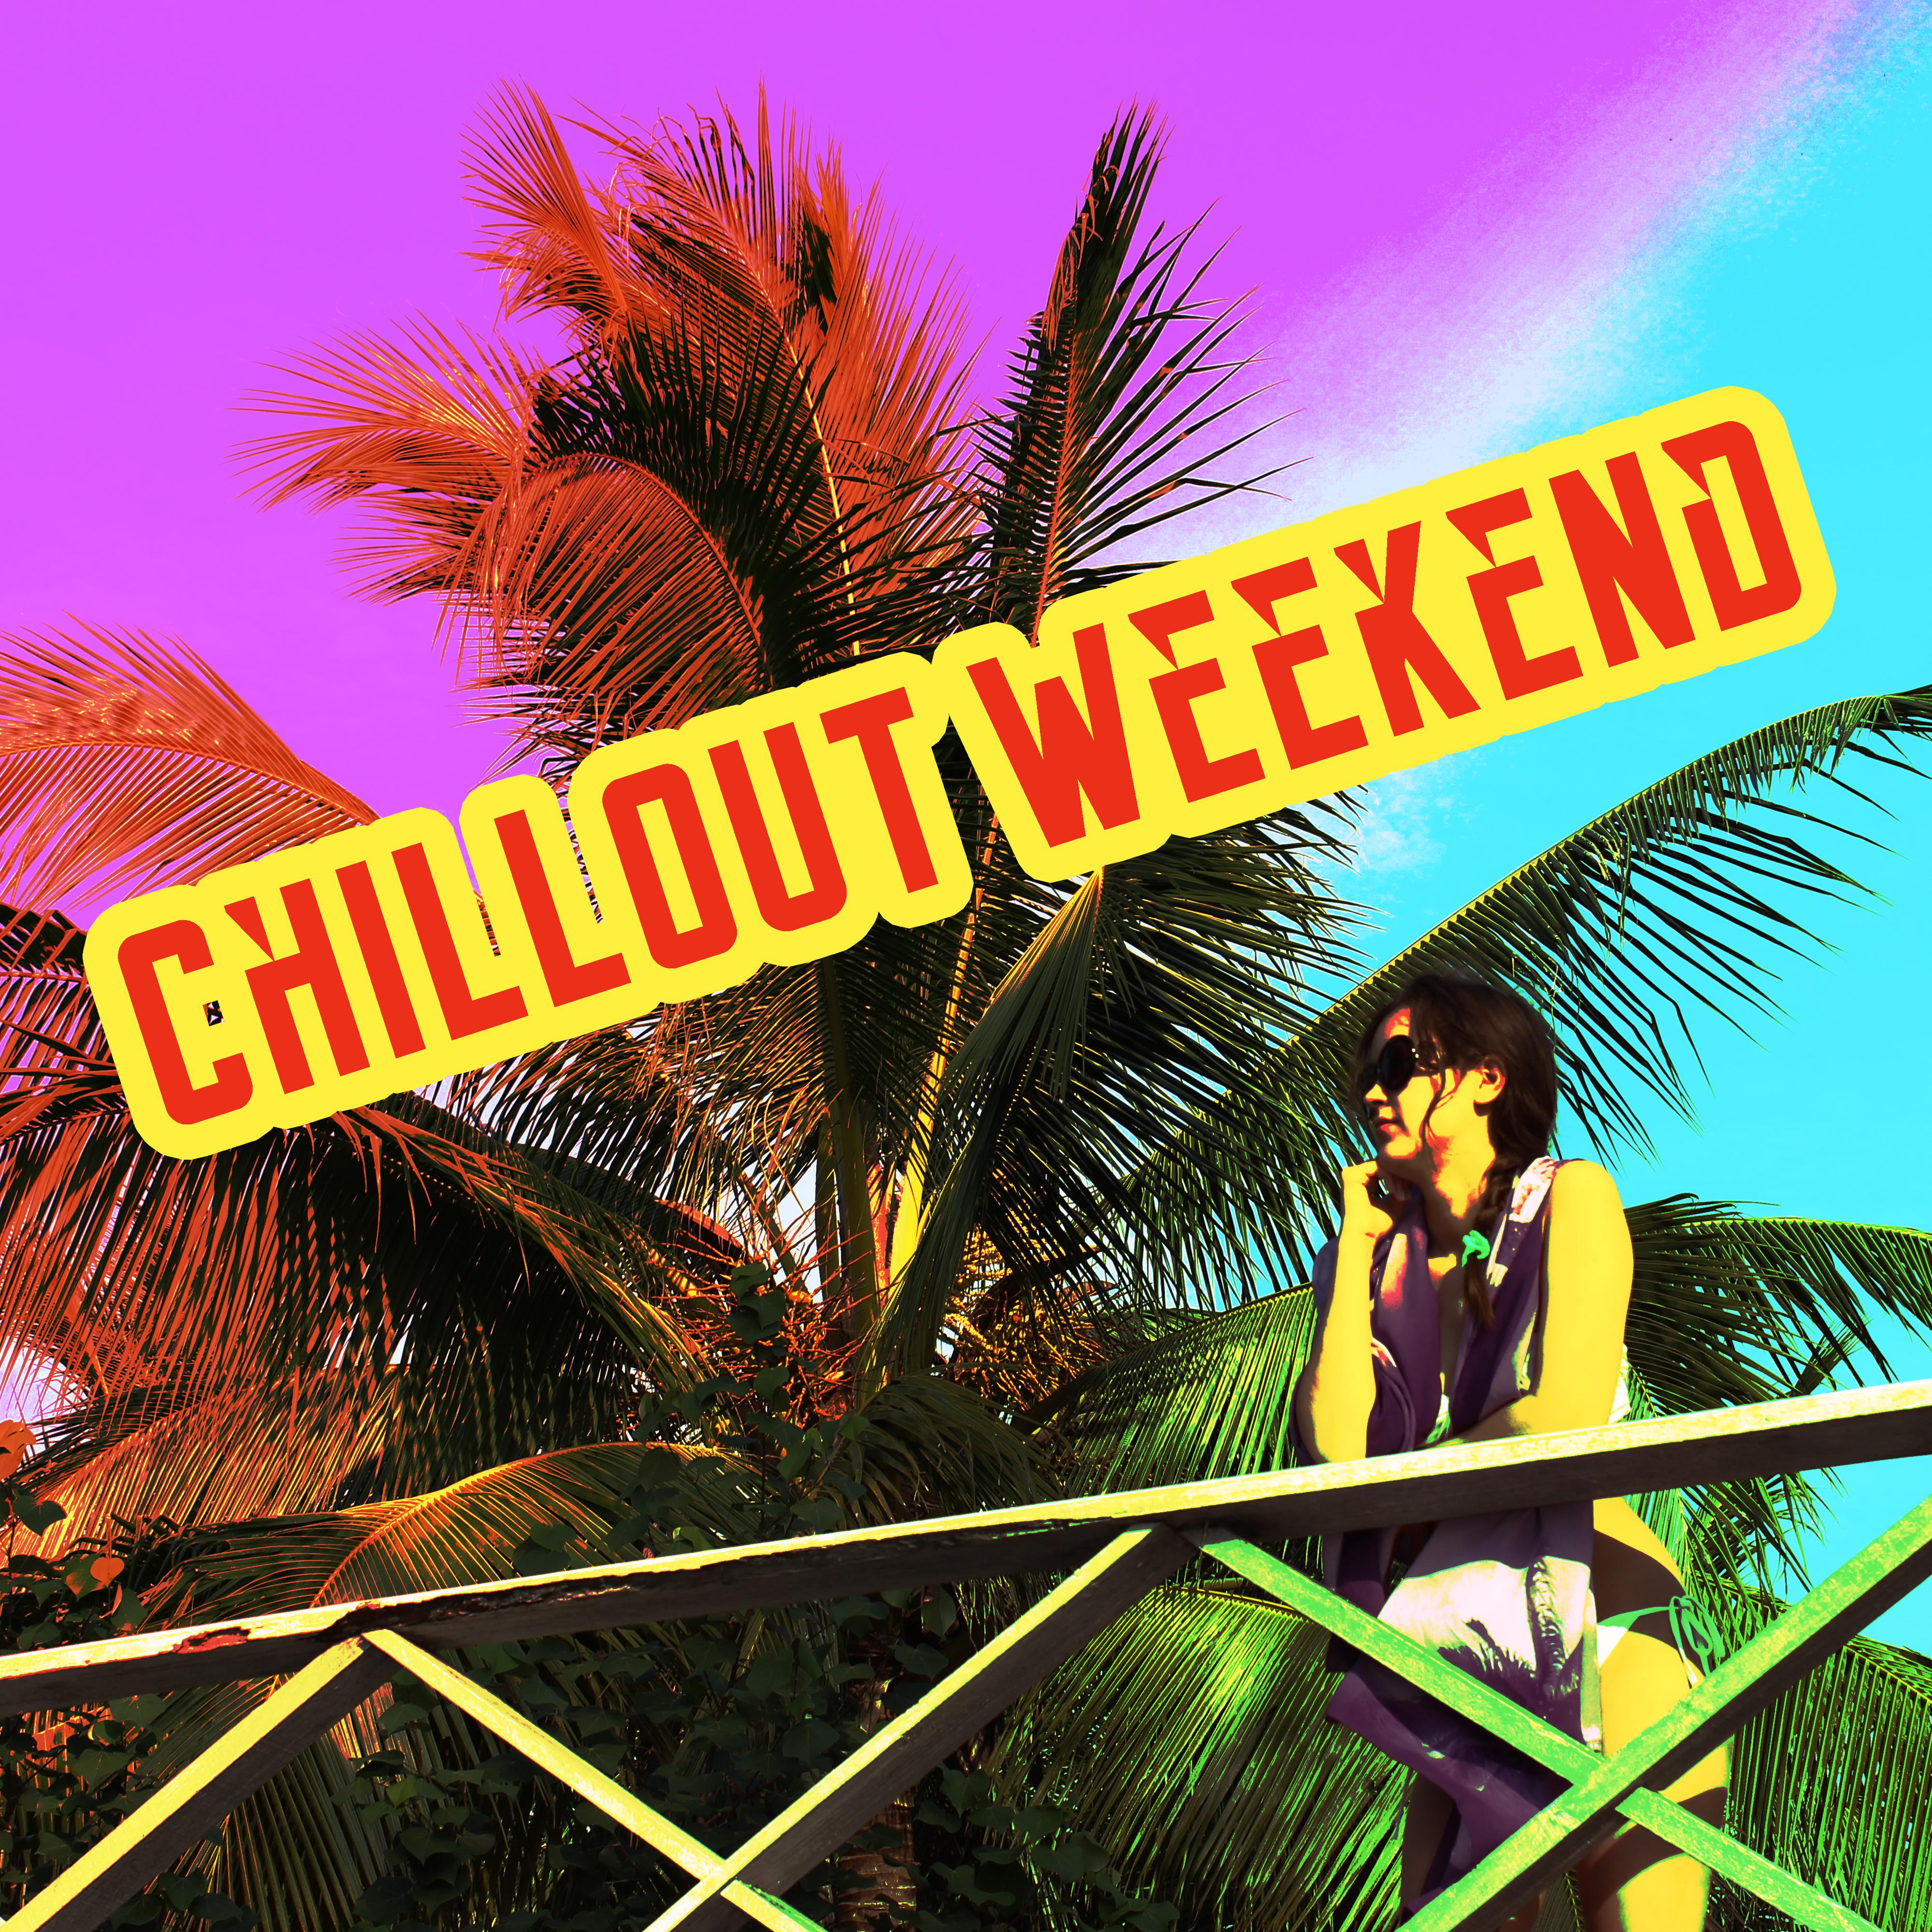 Chillout Weekend – Relaxing Songs, Chillout Music, Rest, Relax, Chill Out 2017, Lounge